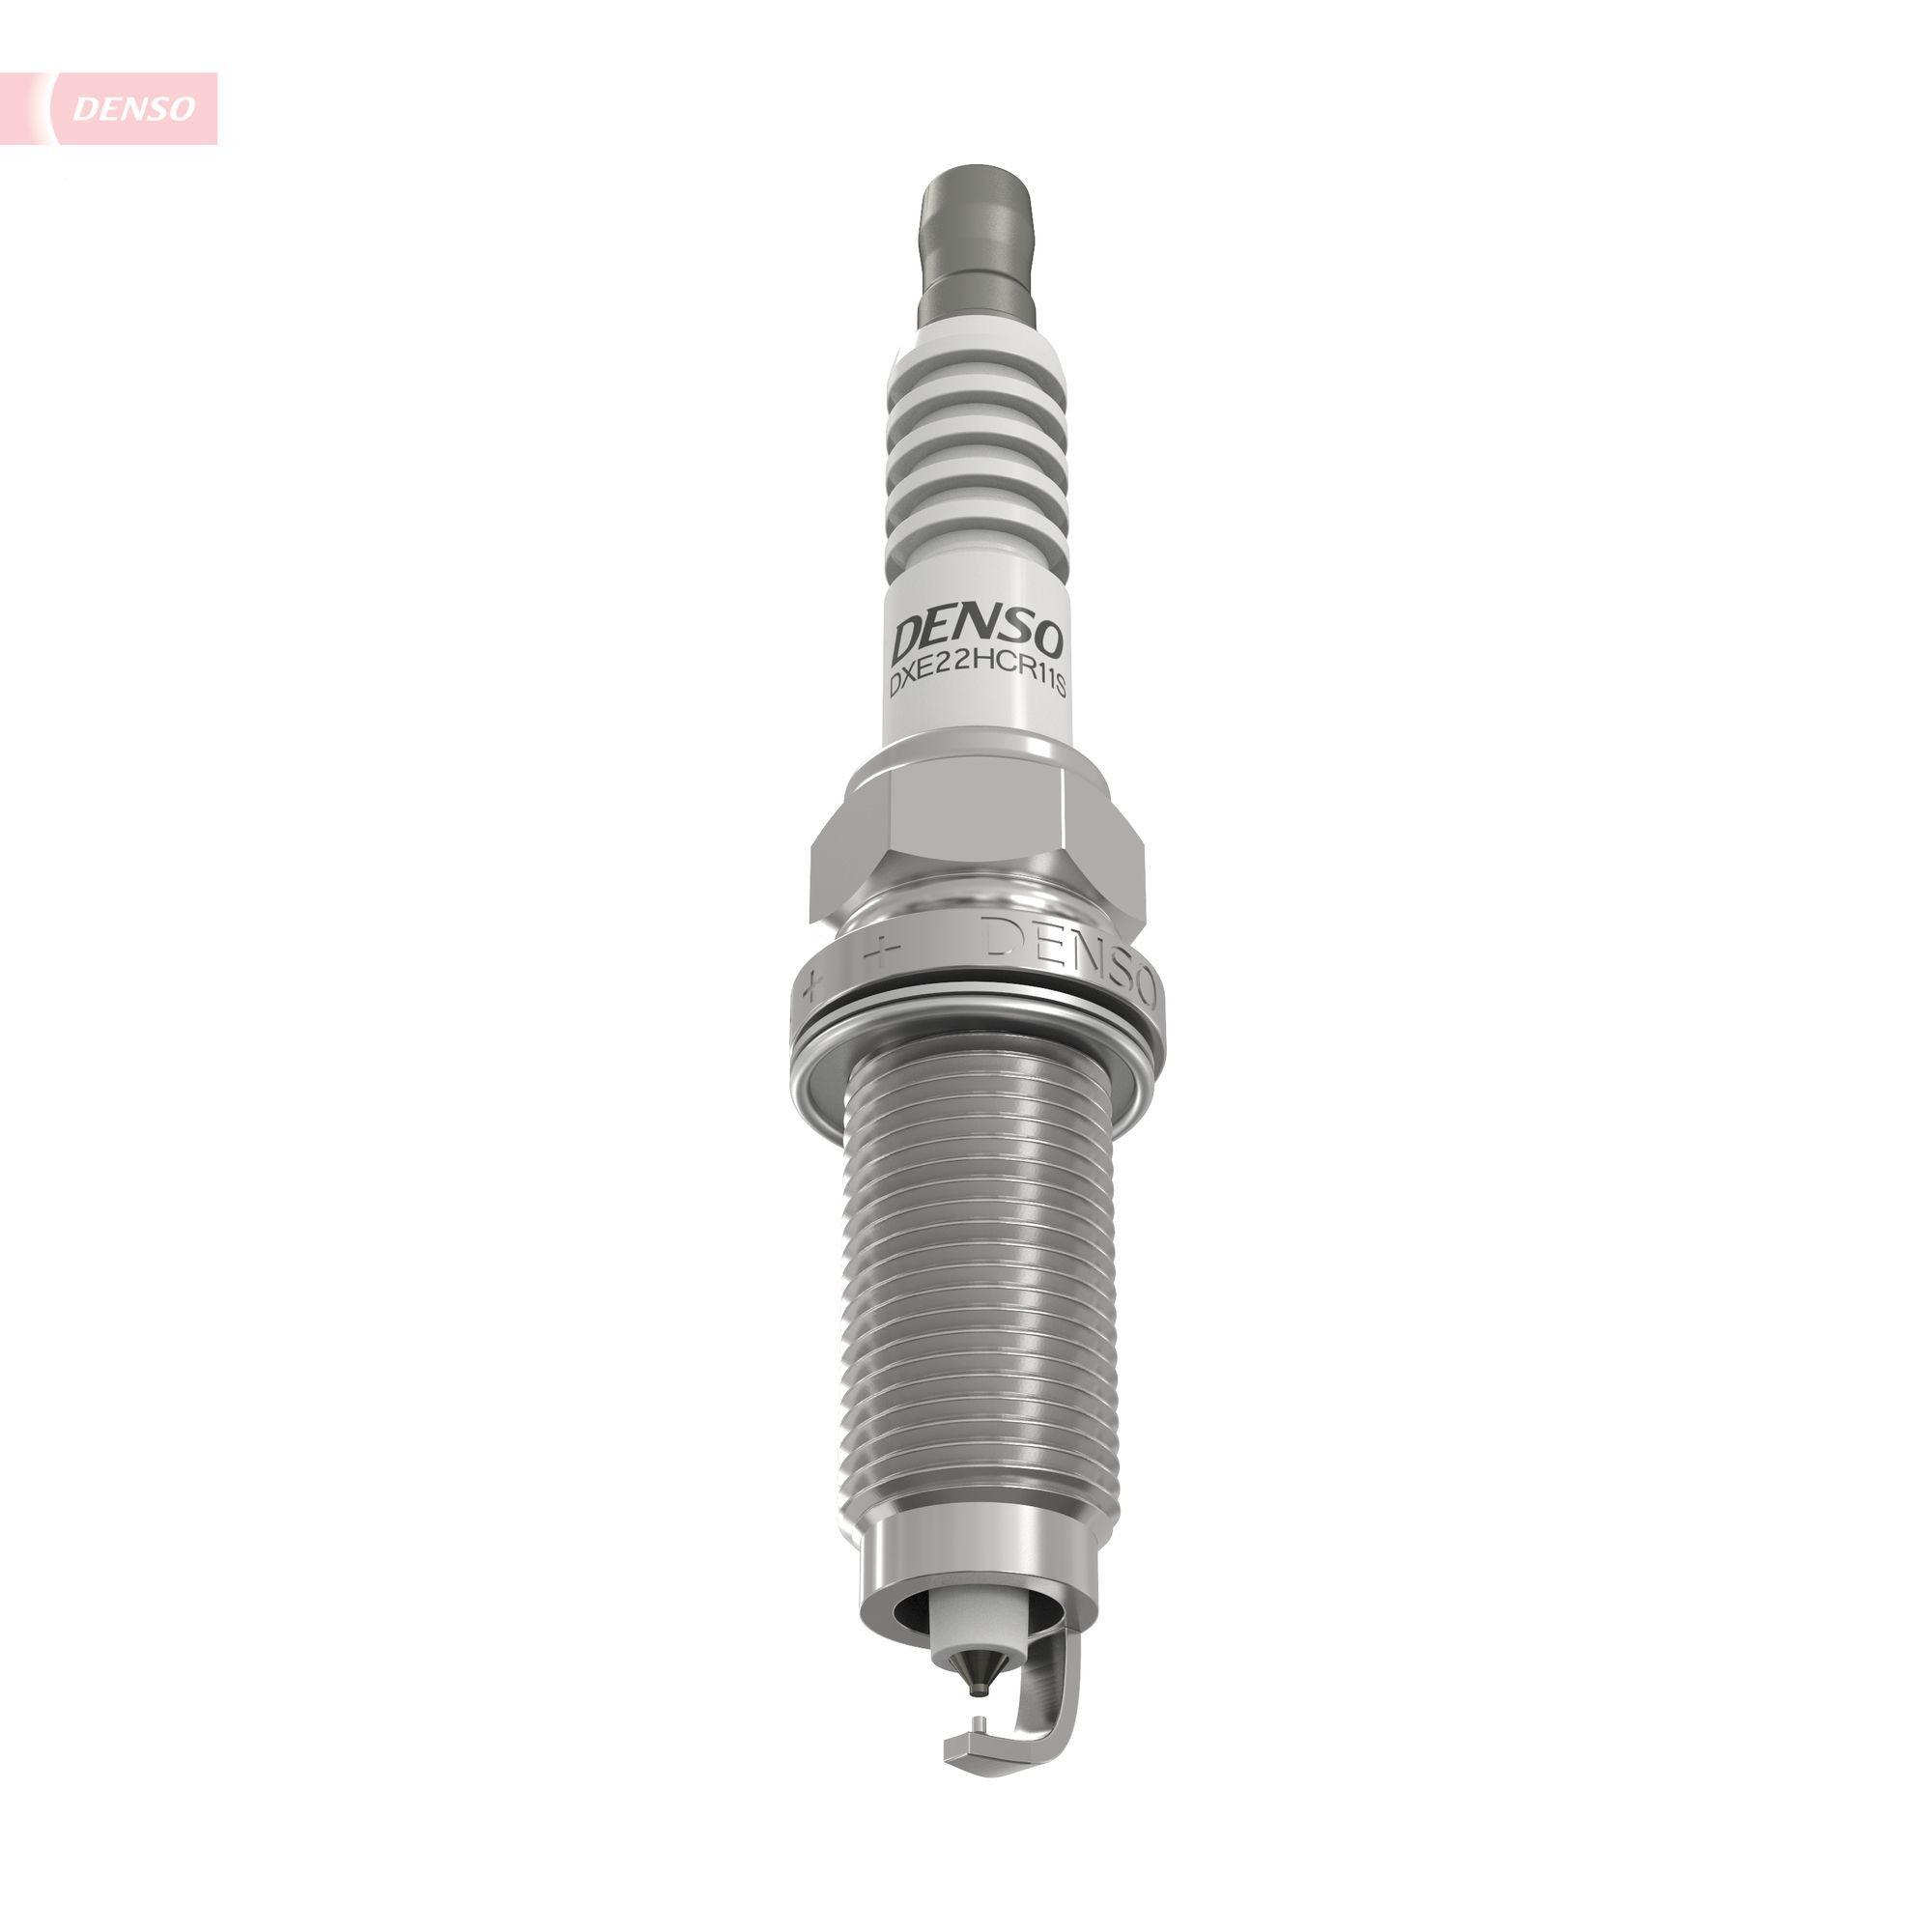 DXE22HCR11S Spark plugs DXE22HCR11S DENSO Spanner Size: 14